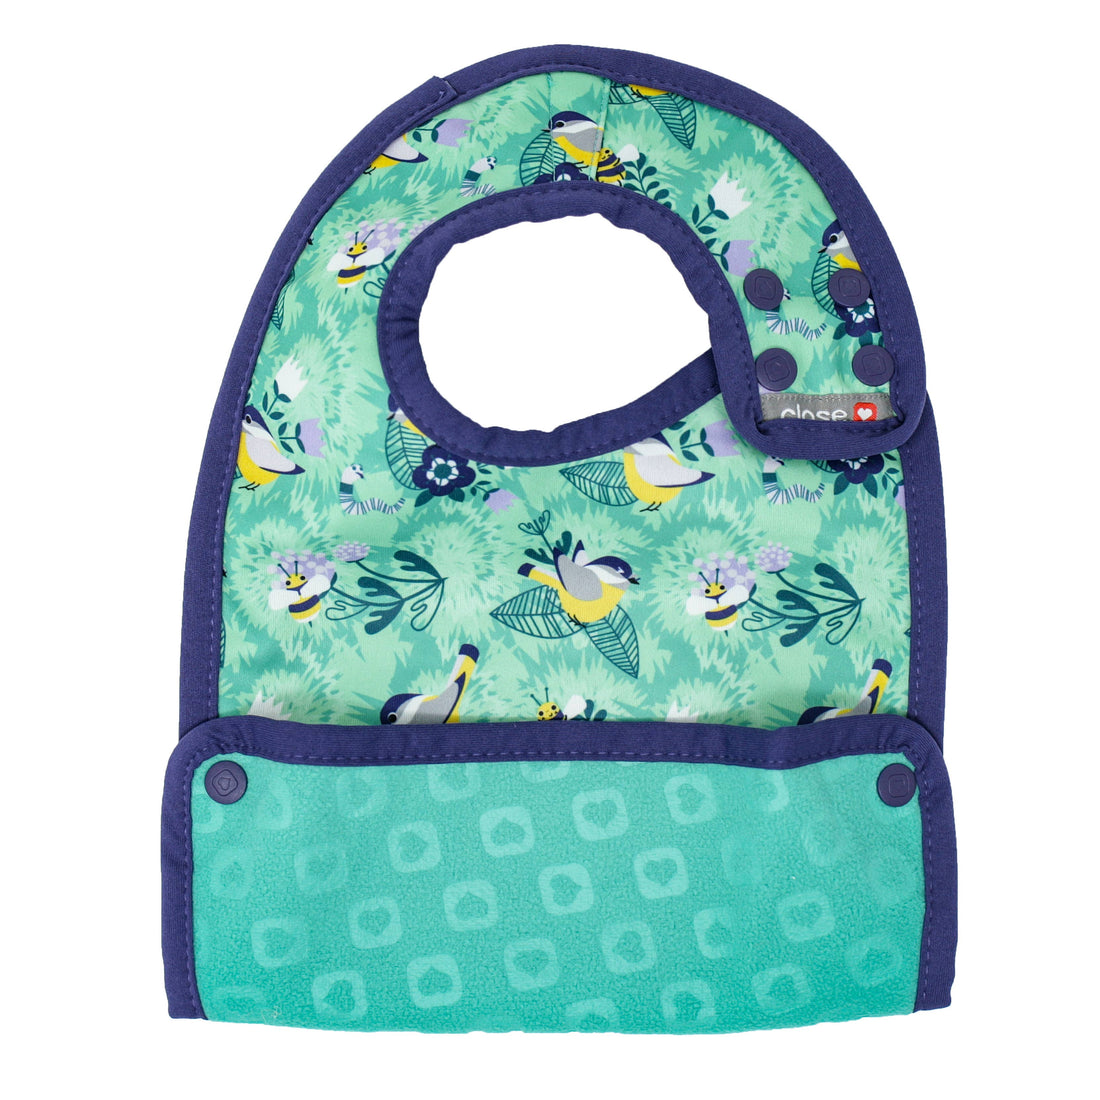 Double-Sided Weaning Bib With Crumb Catcher - Around the Garden